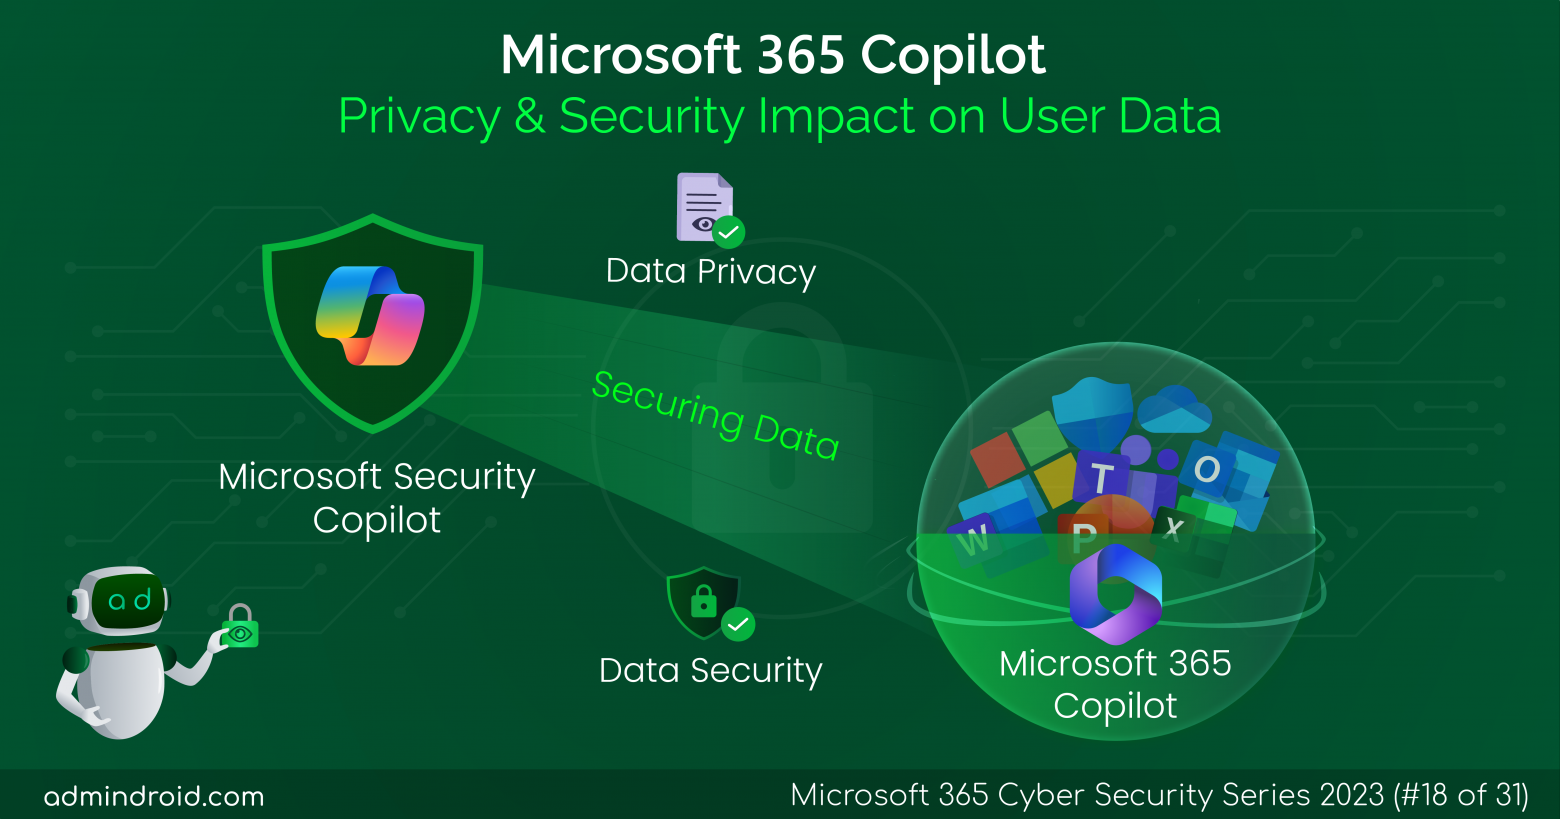 Microsoft 365 Copilot – Privacy & Security Impact on User Data